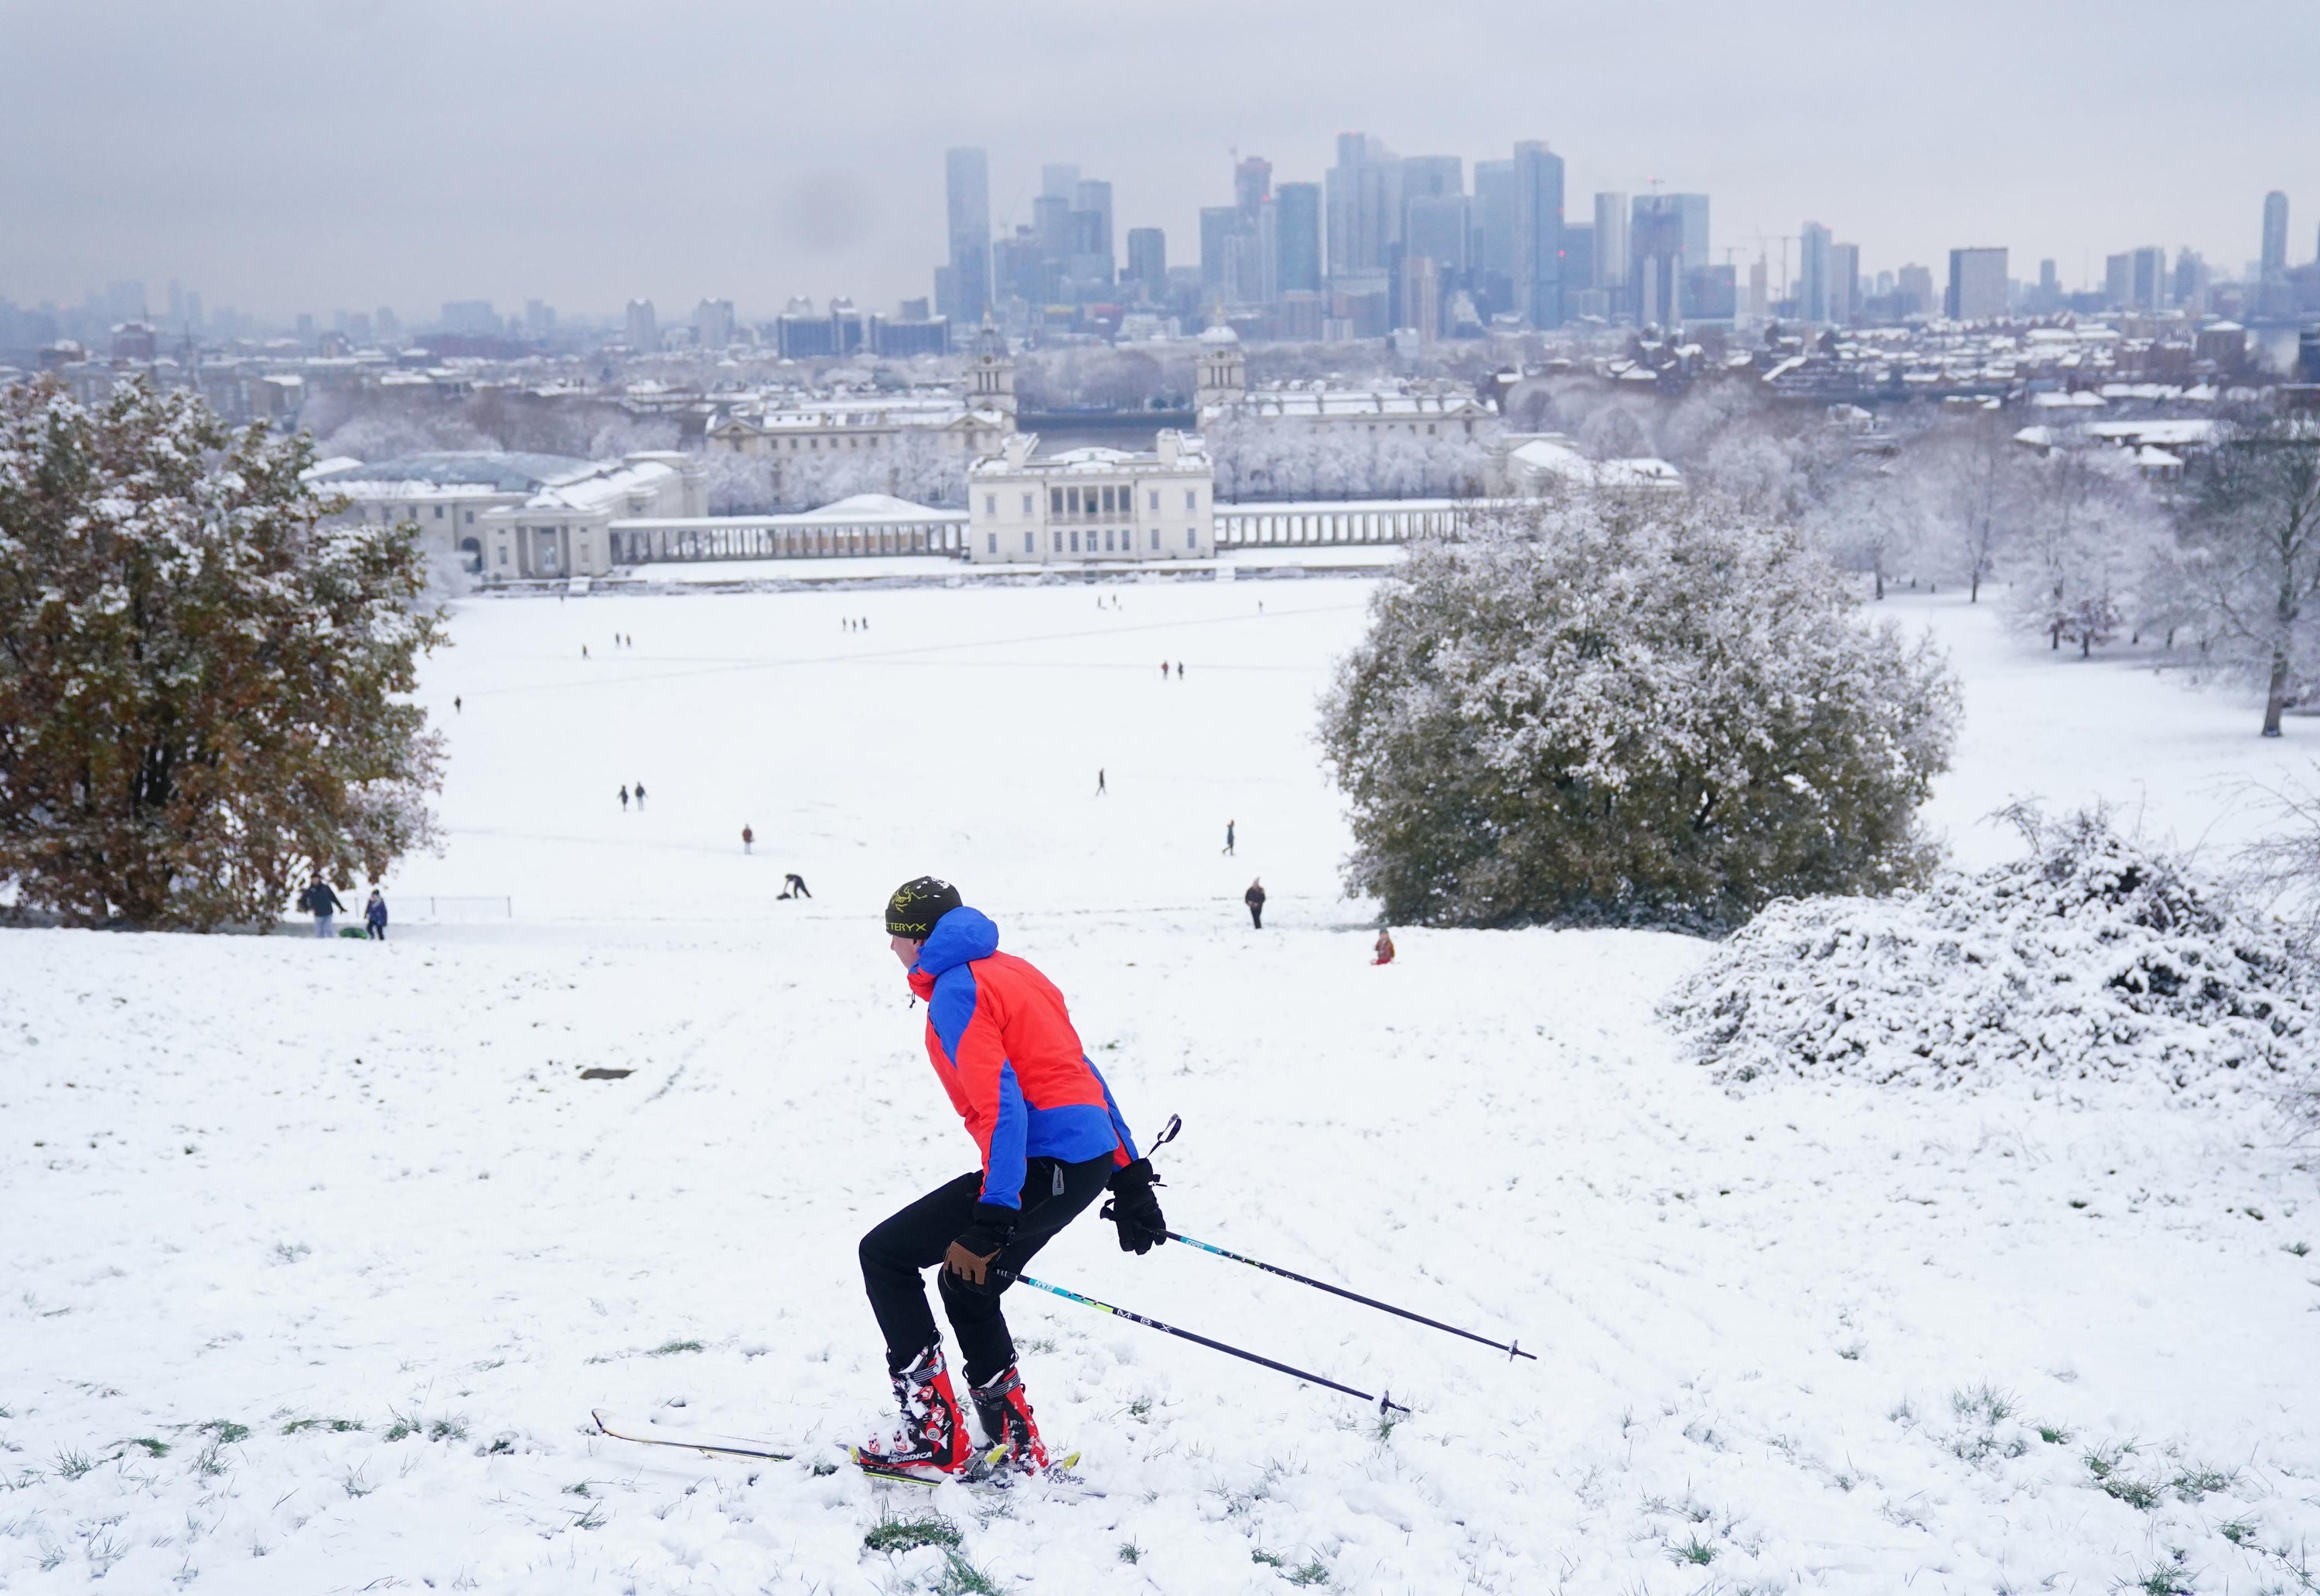 Snow has covered parks in London